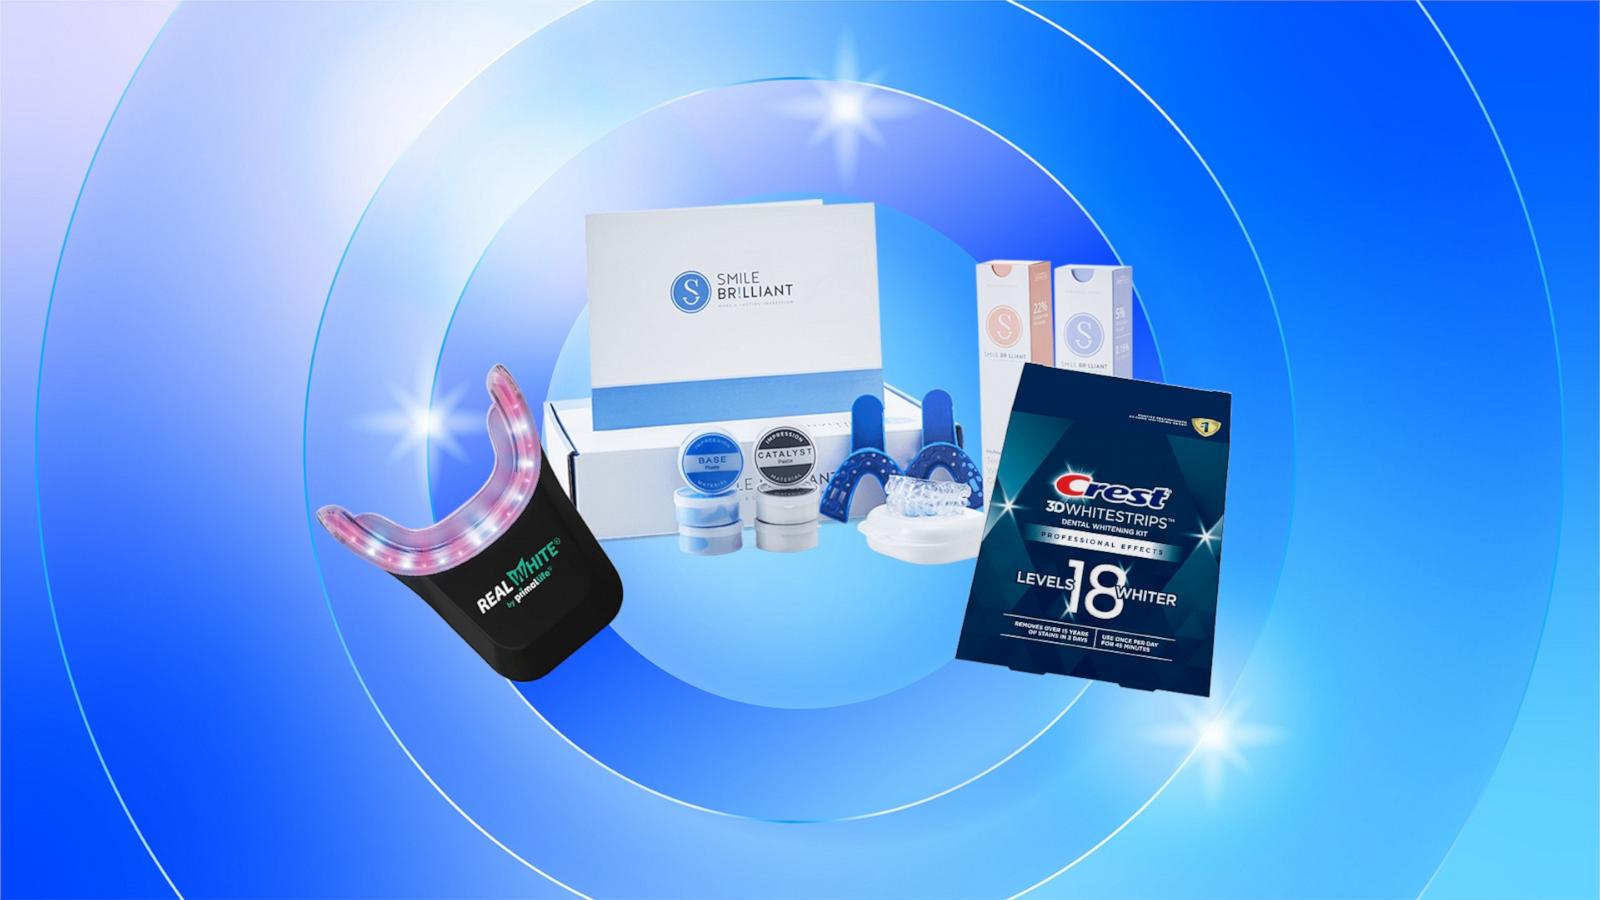 Teeth whitening kits from Crest, Smile Brilliant and Primal Organics.